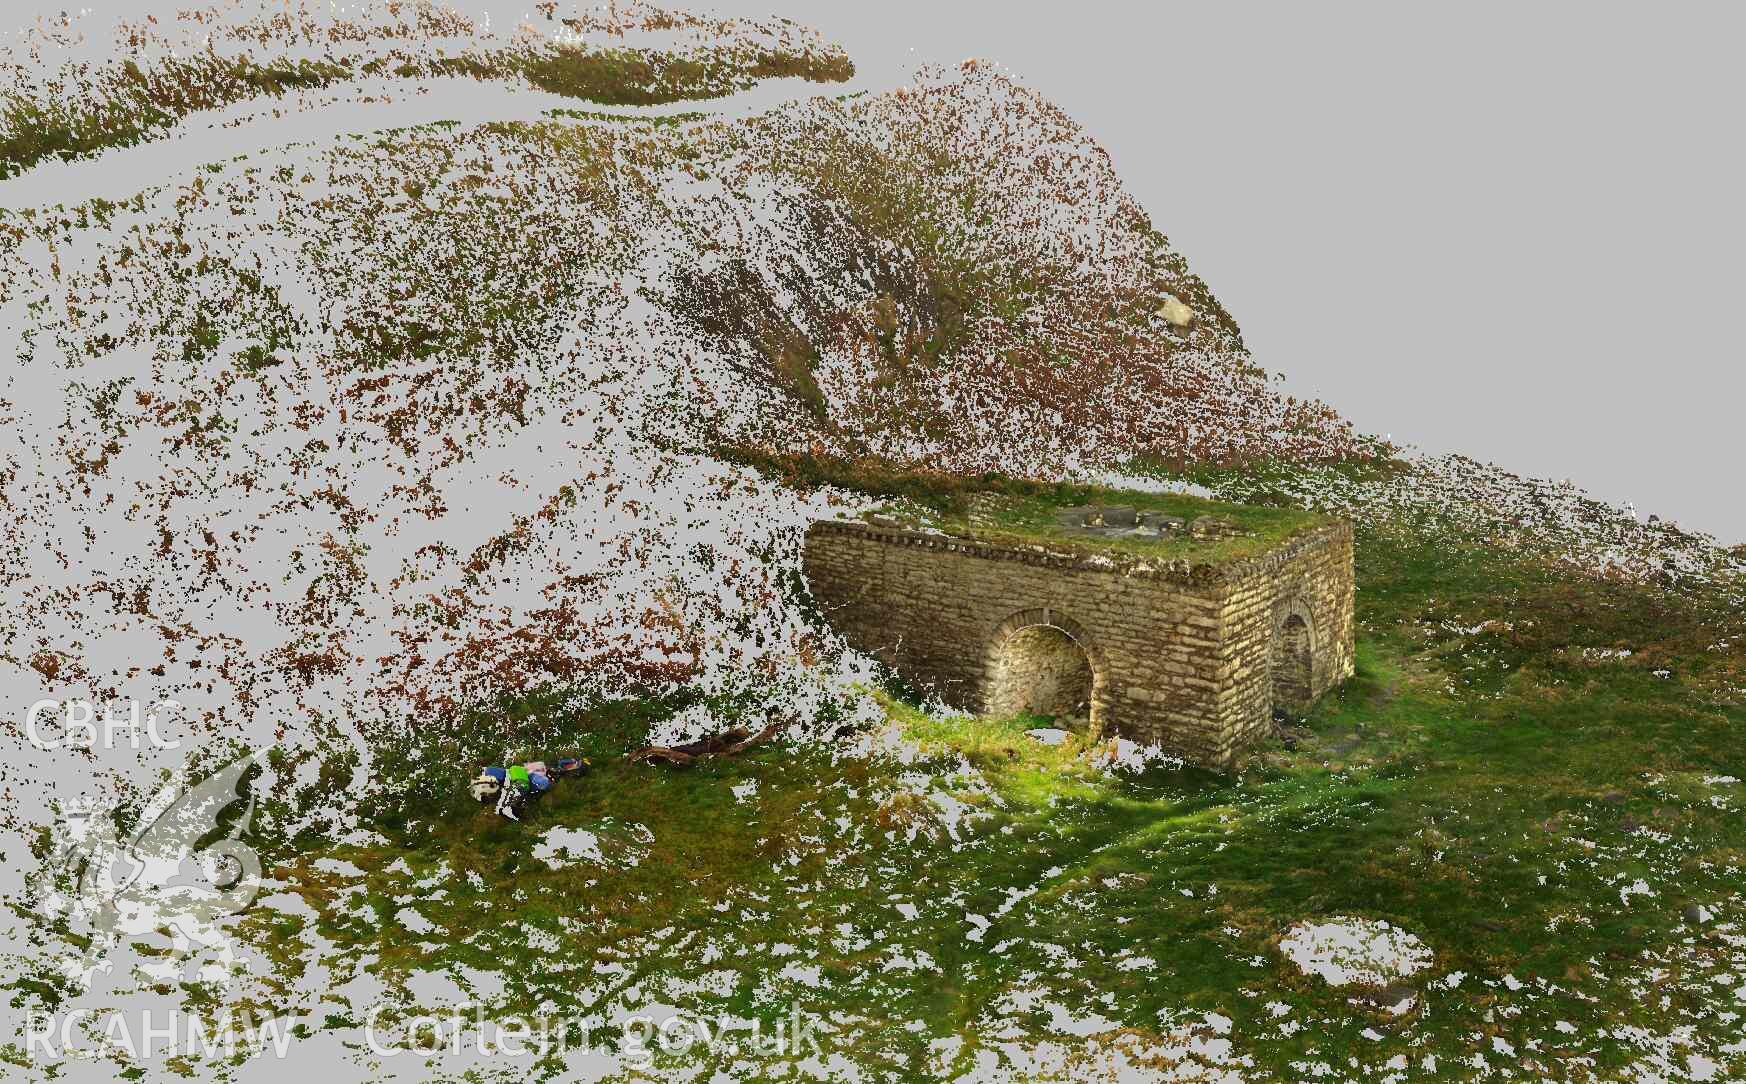 View of Wallog lime kiln looking south (taken from point cloud dataset). The Wales Coast Path can be seen up the slope from the lime kiln, denoted by the lack of points. Produced as part of Terrestrial Laser Scanning Survey of Wallog Limekiln, carried out by Dr Jayne Kamintzis, 1 December 2022.